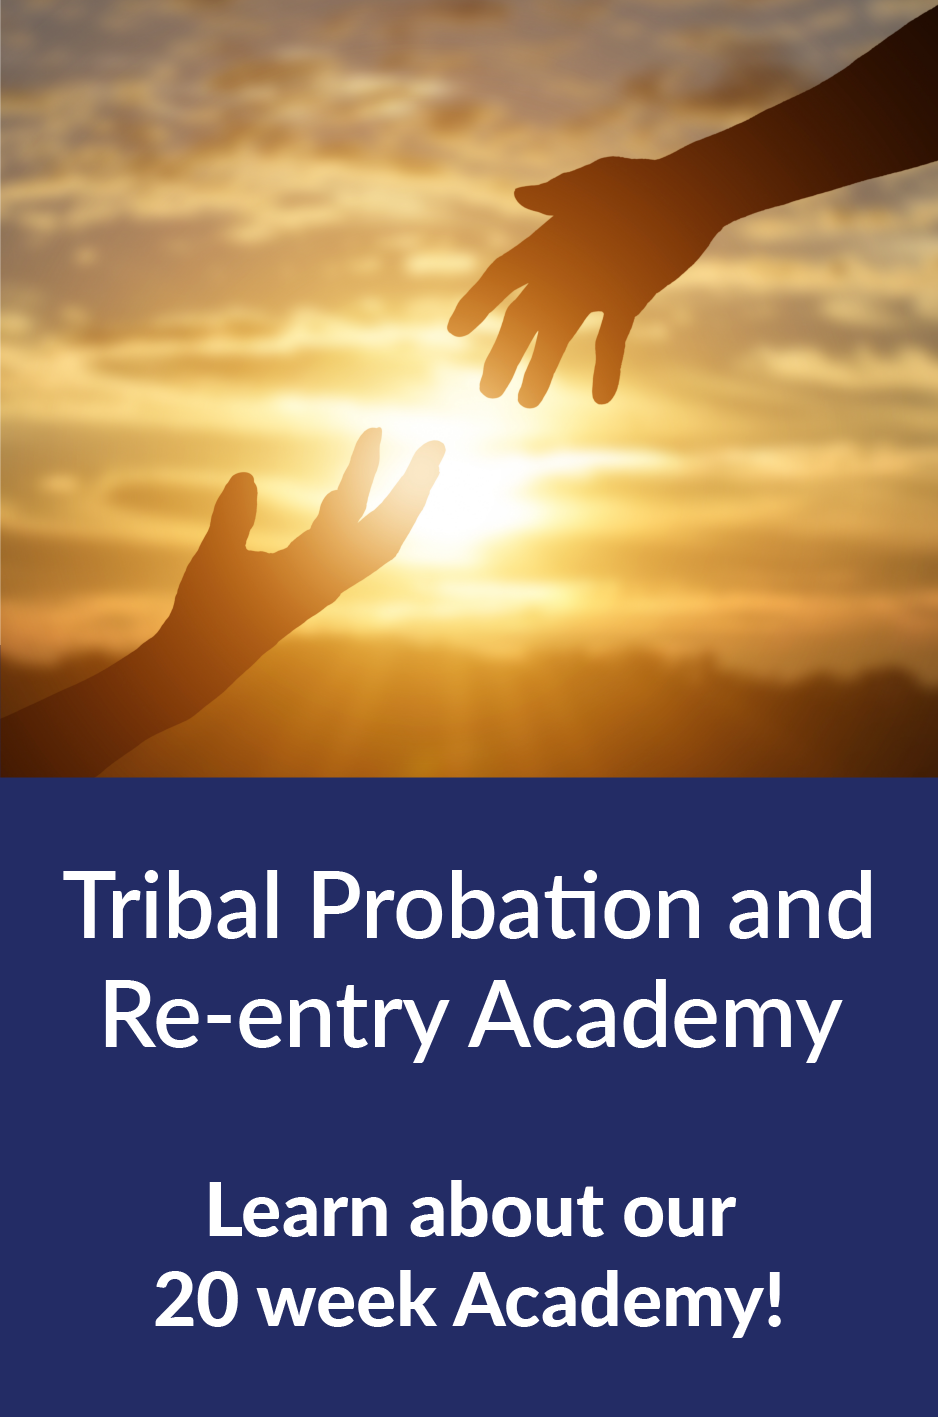 Tribal Probation and Re-entry Academy